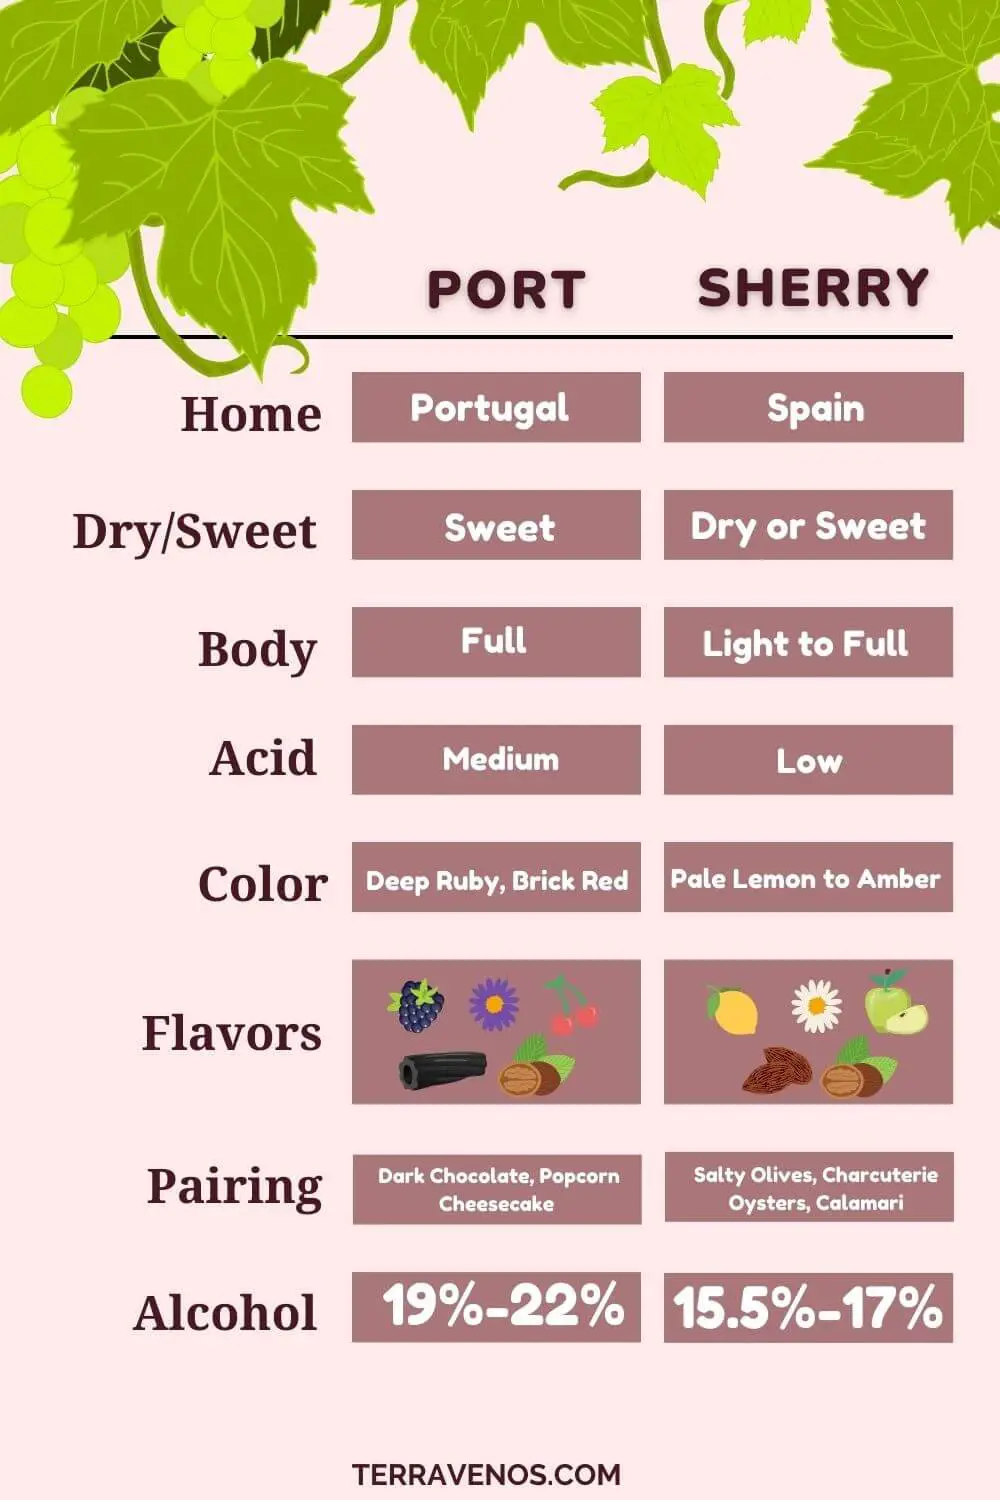 port-vs-sherry-side-by-side-comparison-infographic